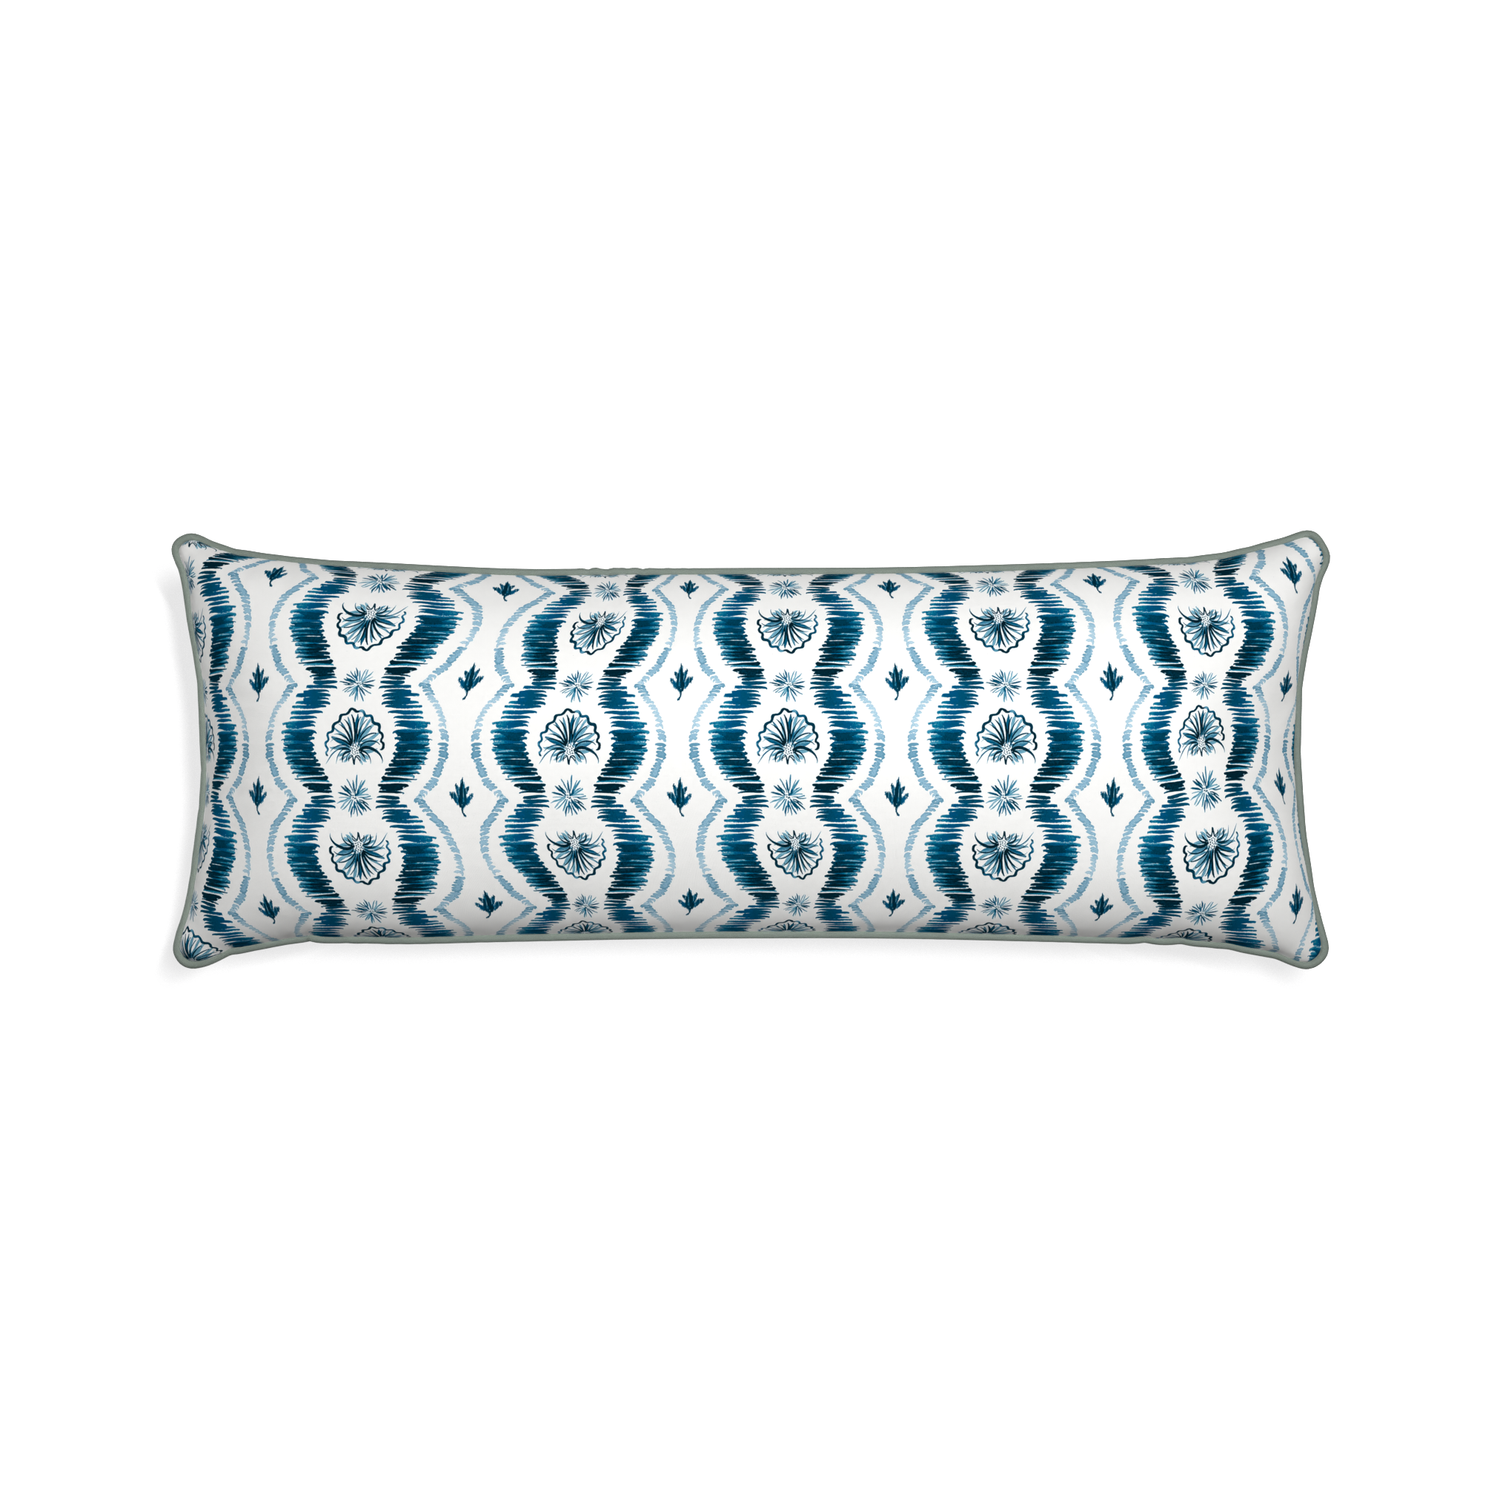 Xl-lumbar alice custom blue ikatpillow with sage piping on white background